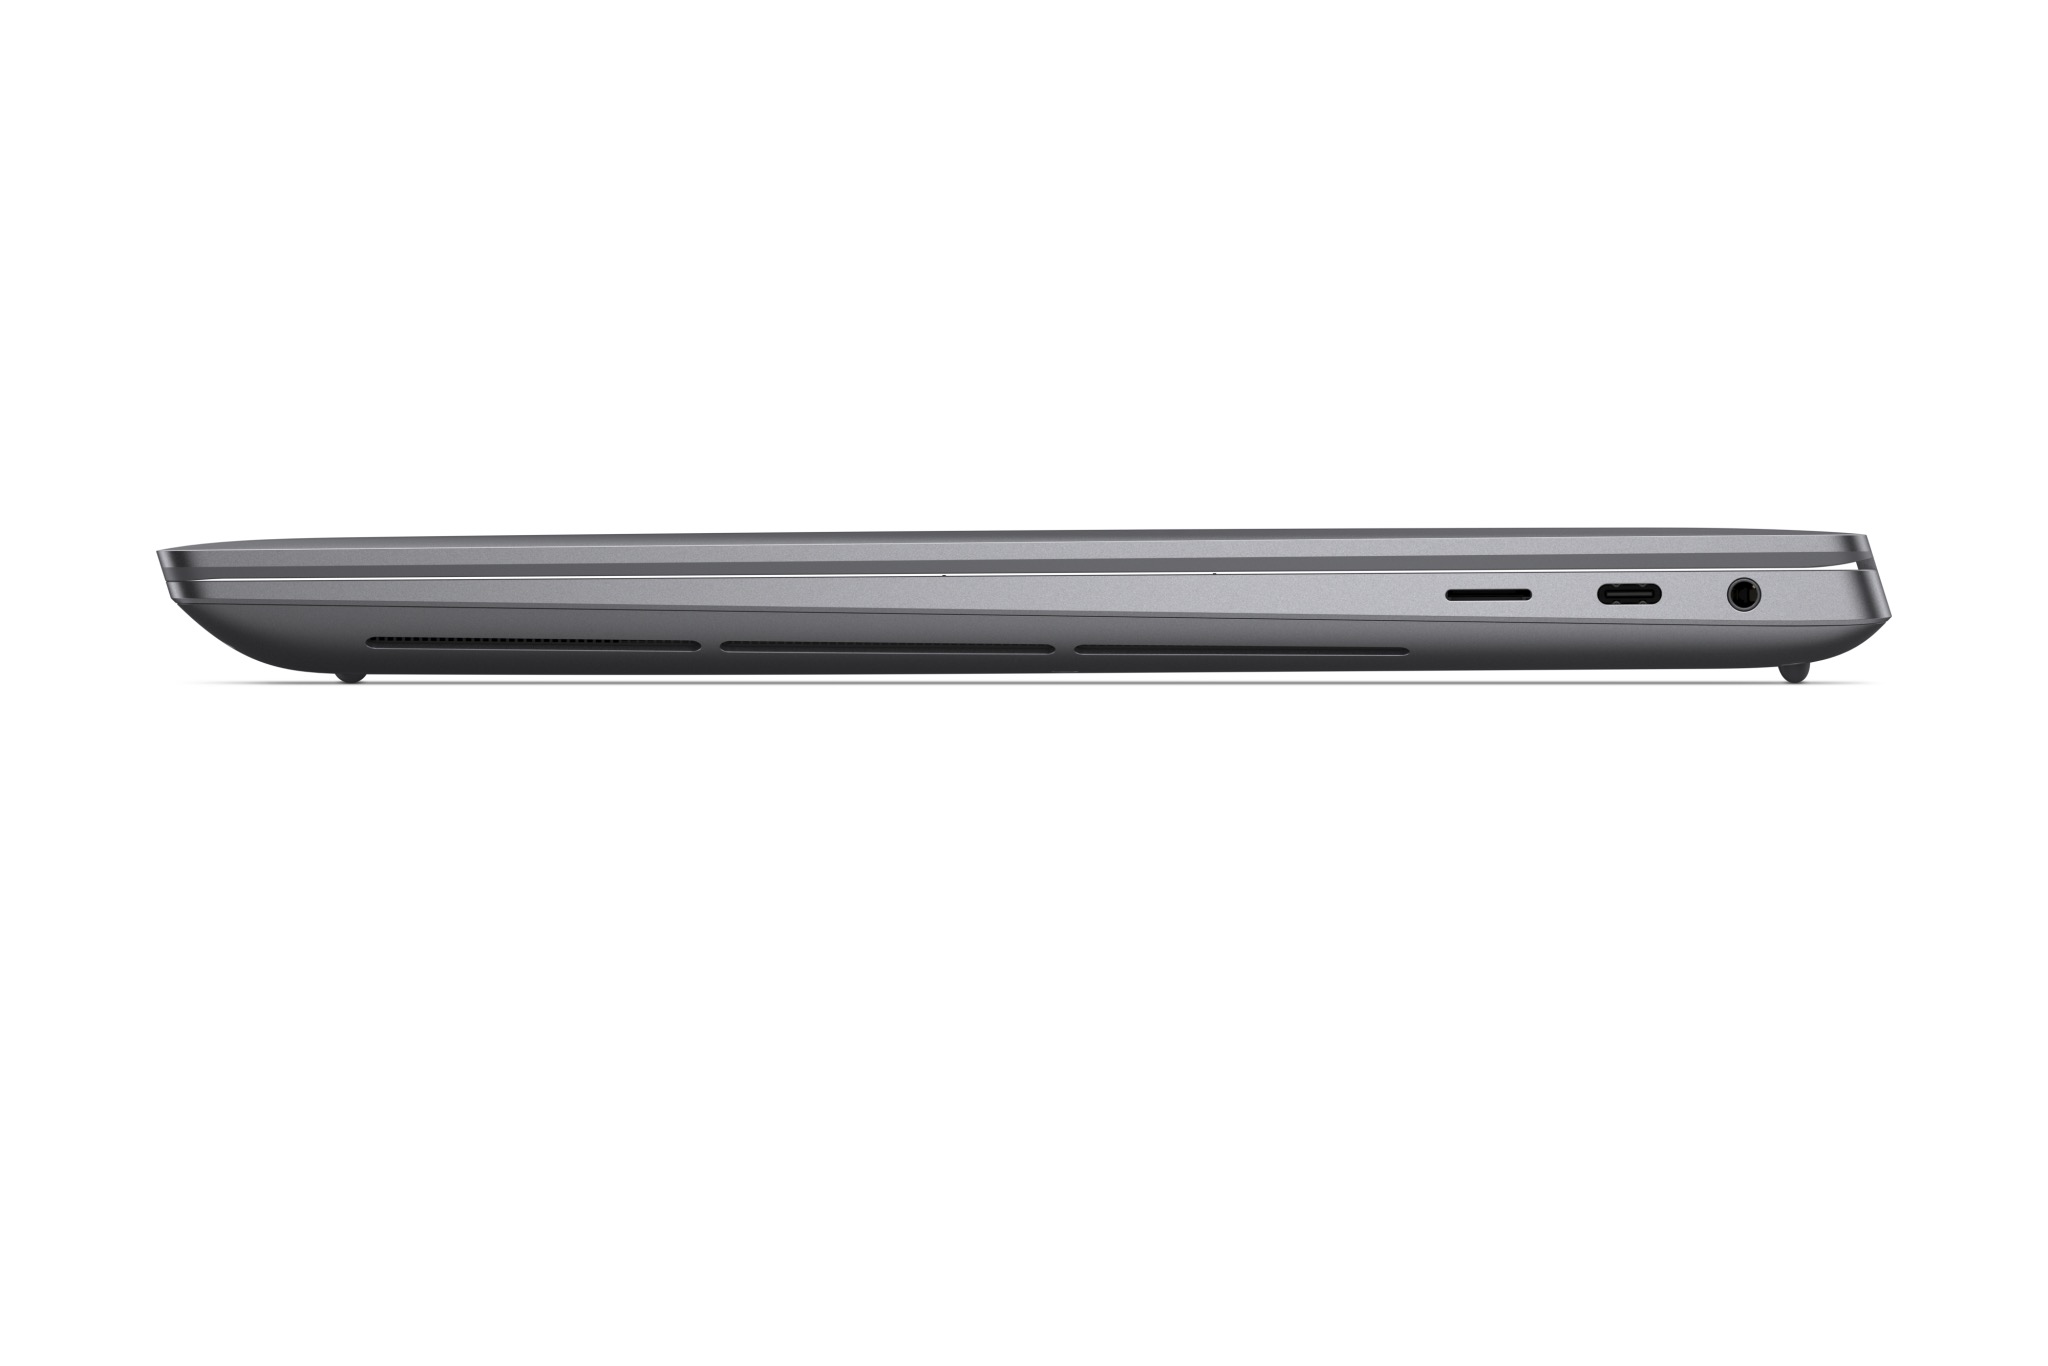 Dell XPS 16 side view showing ports.